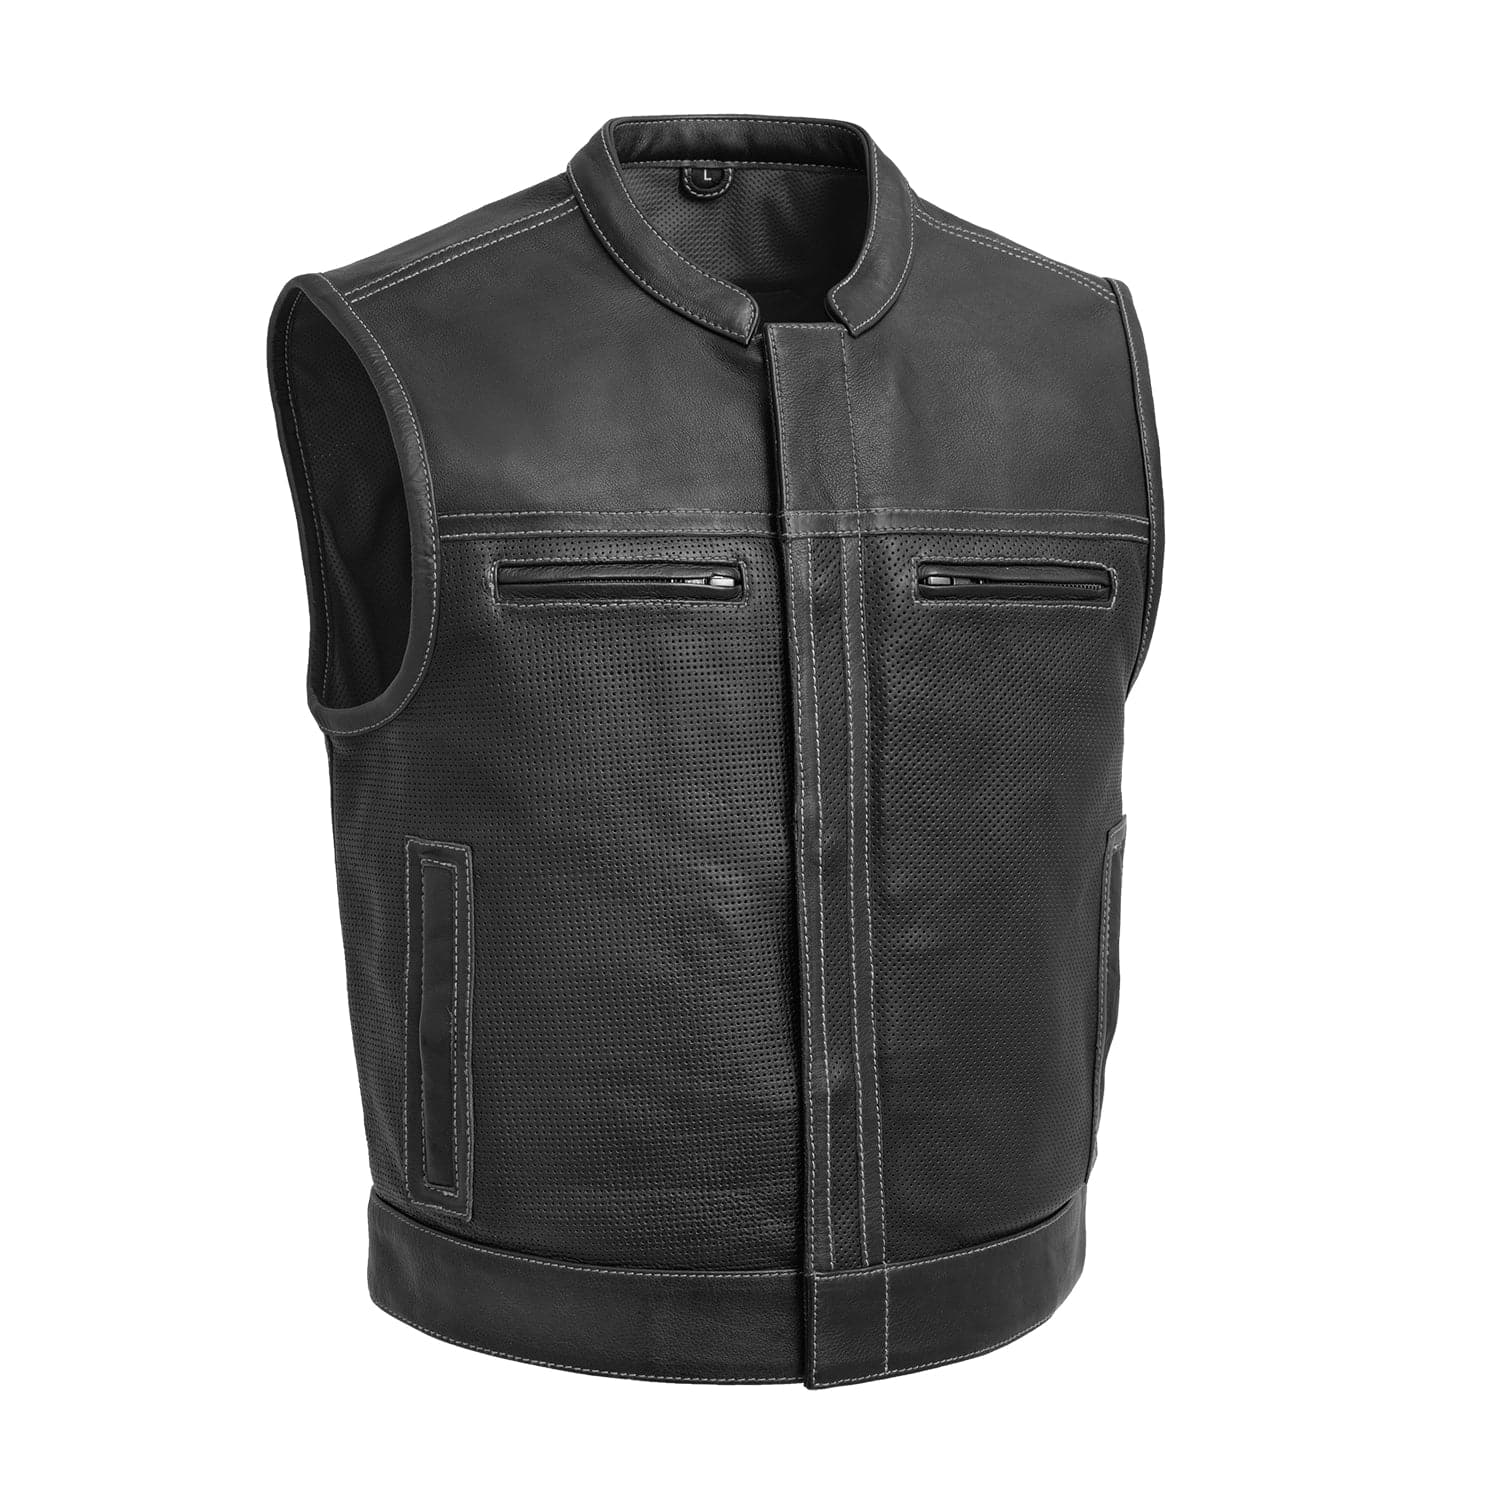 Lowrider Perforated Men's Leather Vest Men's Leather Vest First Manufacturing Company Black White S 